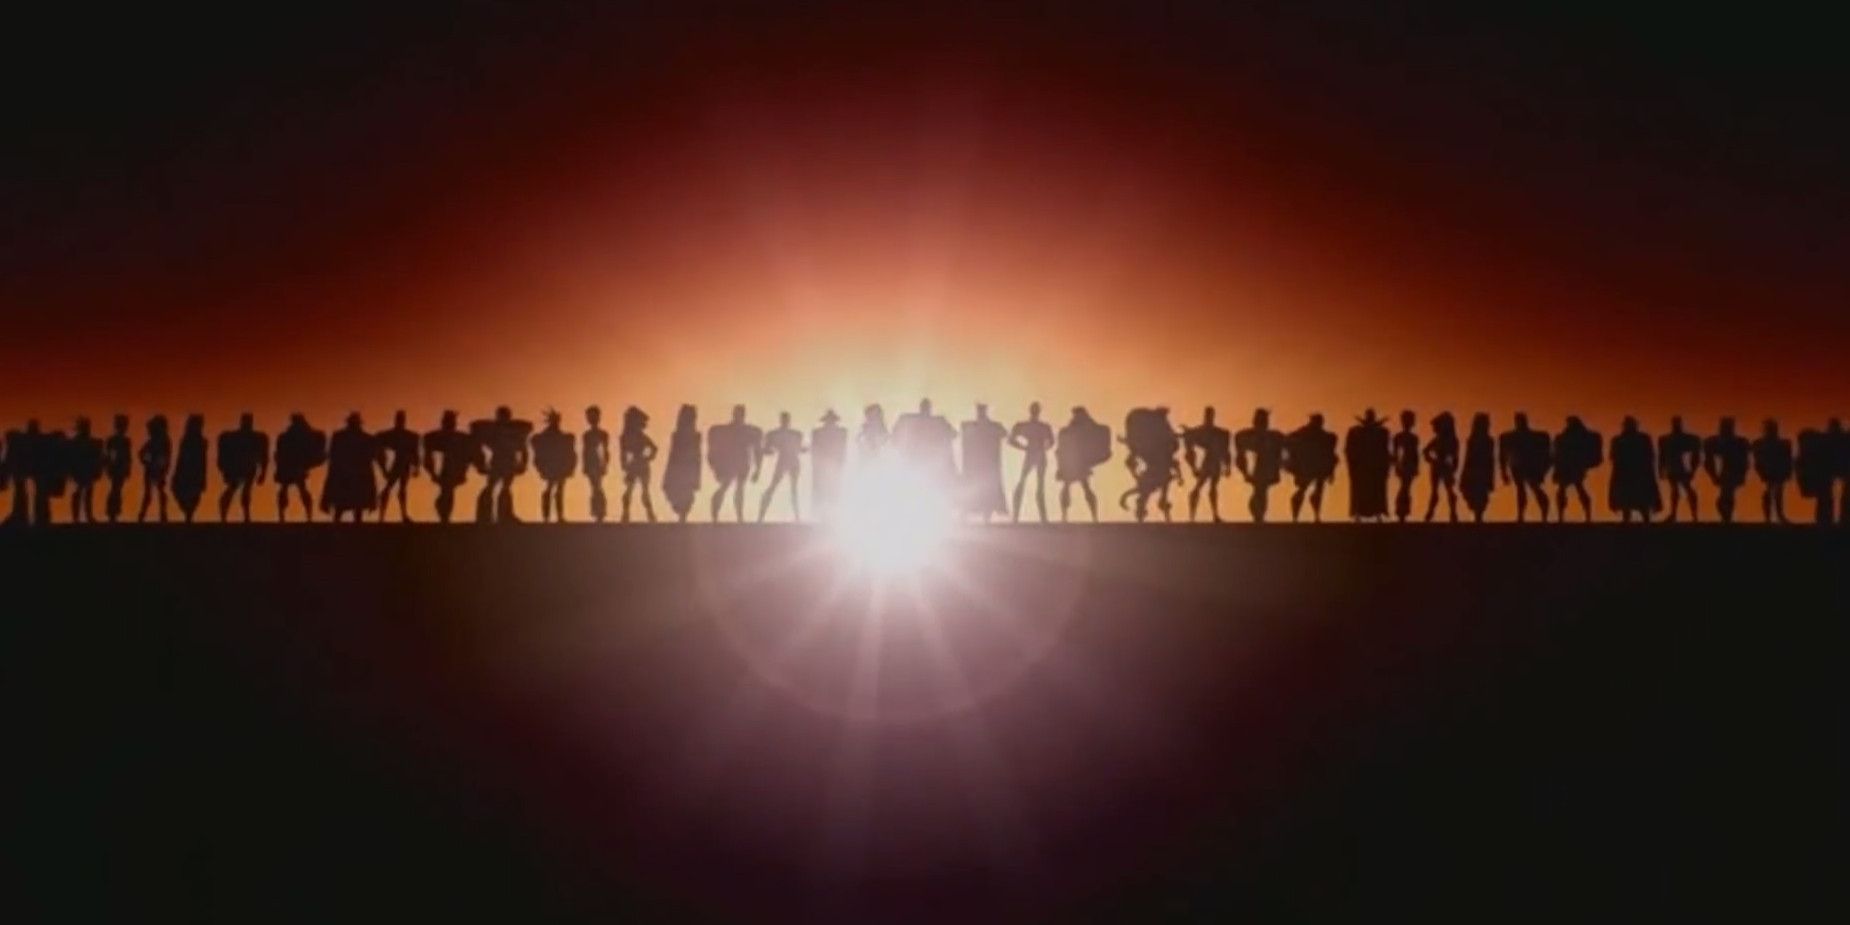 The Justice League Unlimited group silhouettes.